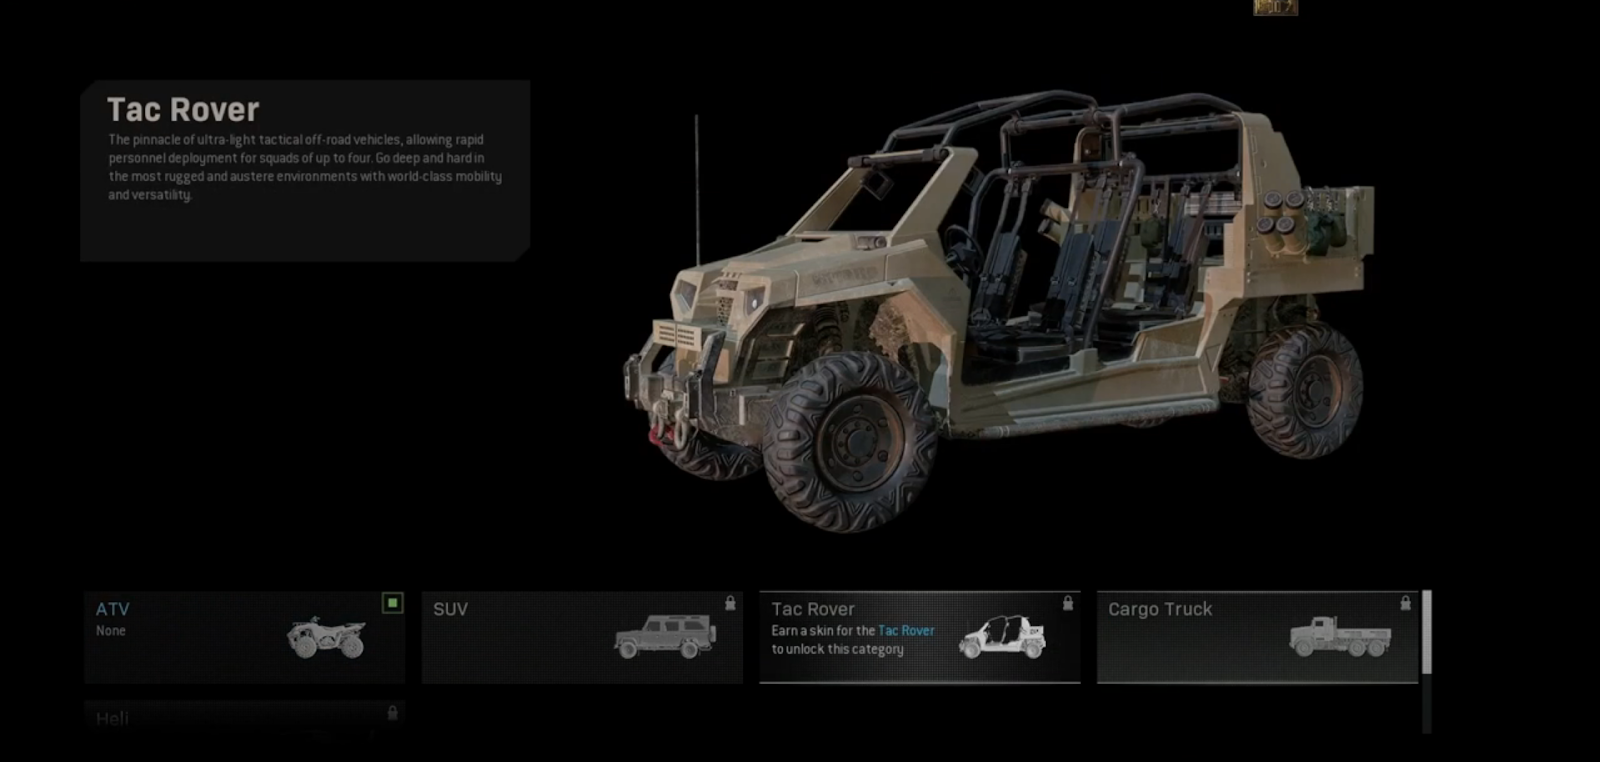 Even the vehicles can be customized in COD Warzone.